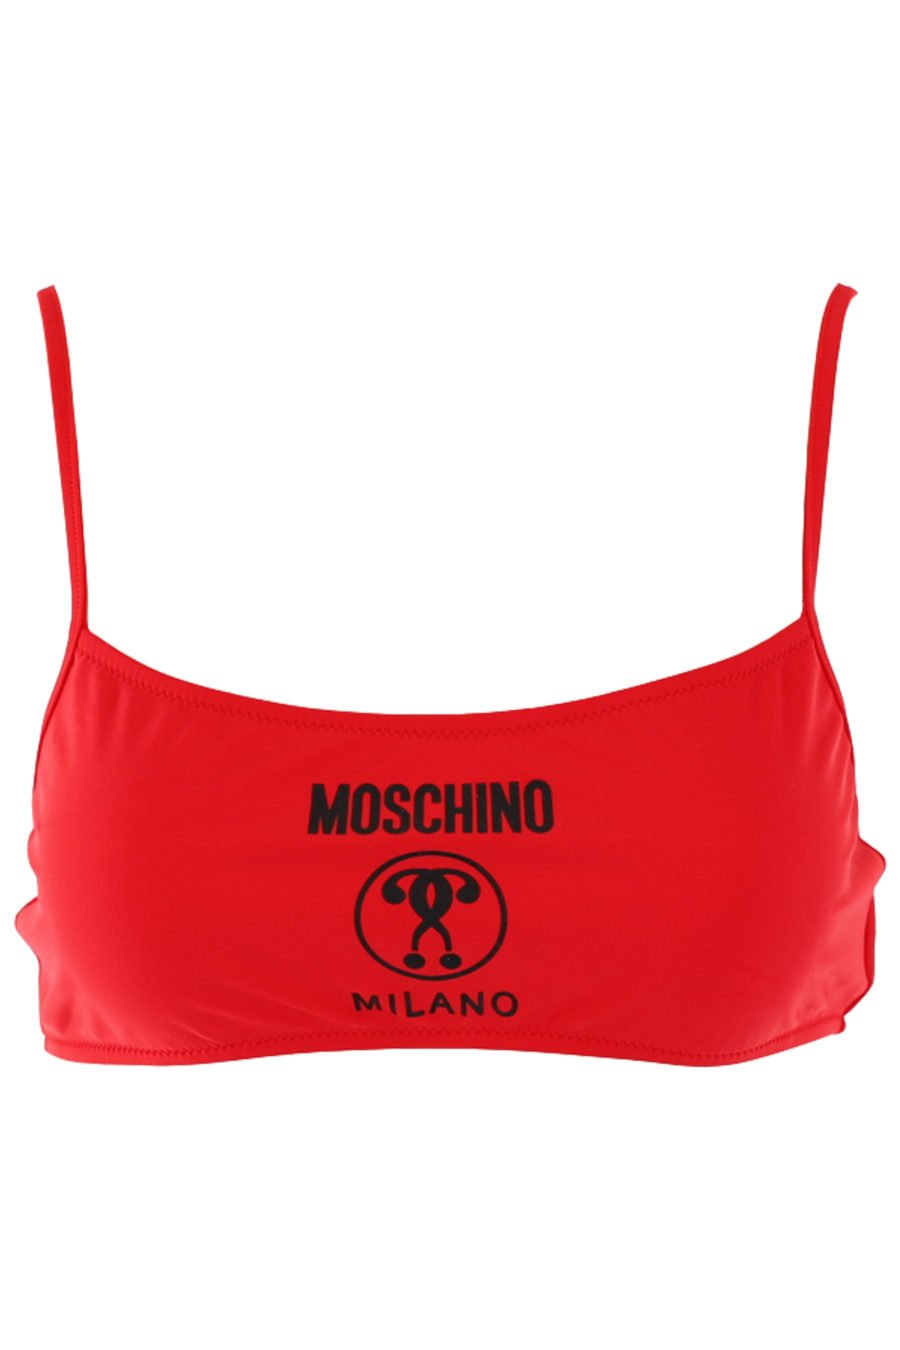 Straight bikini top red with black double question logo - IMG 0765